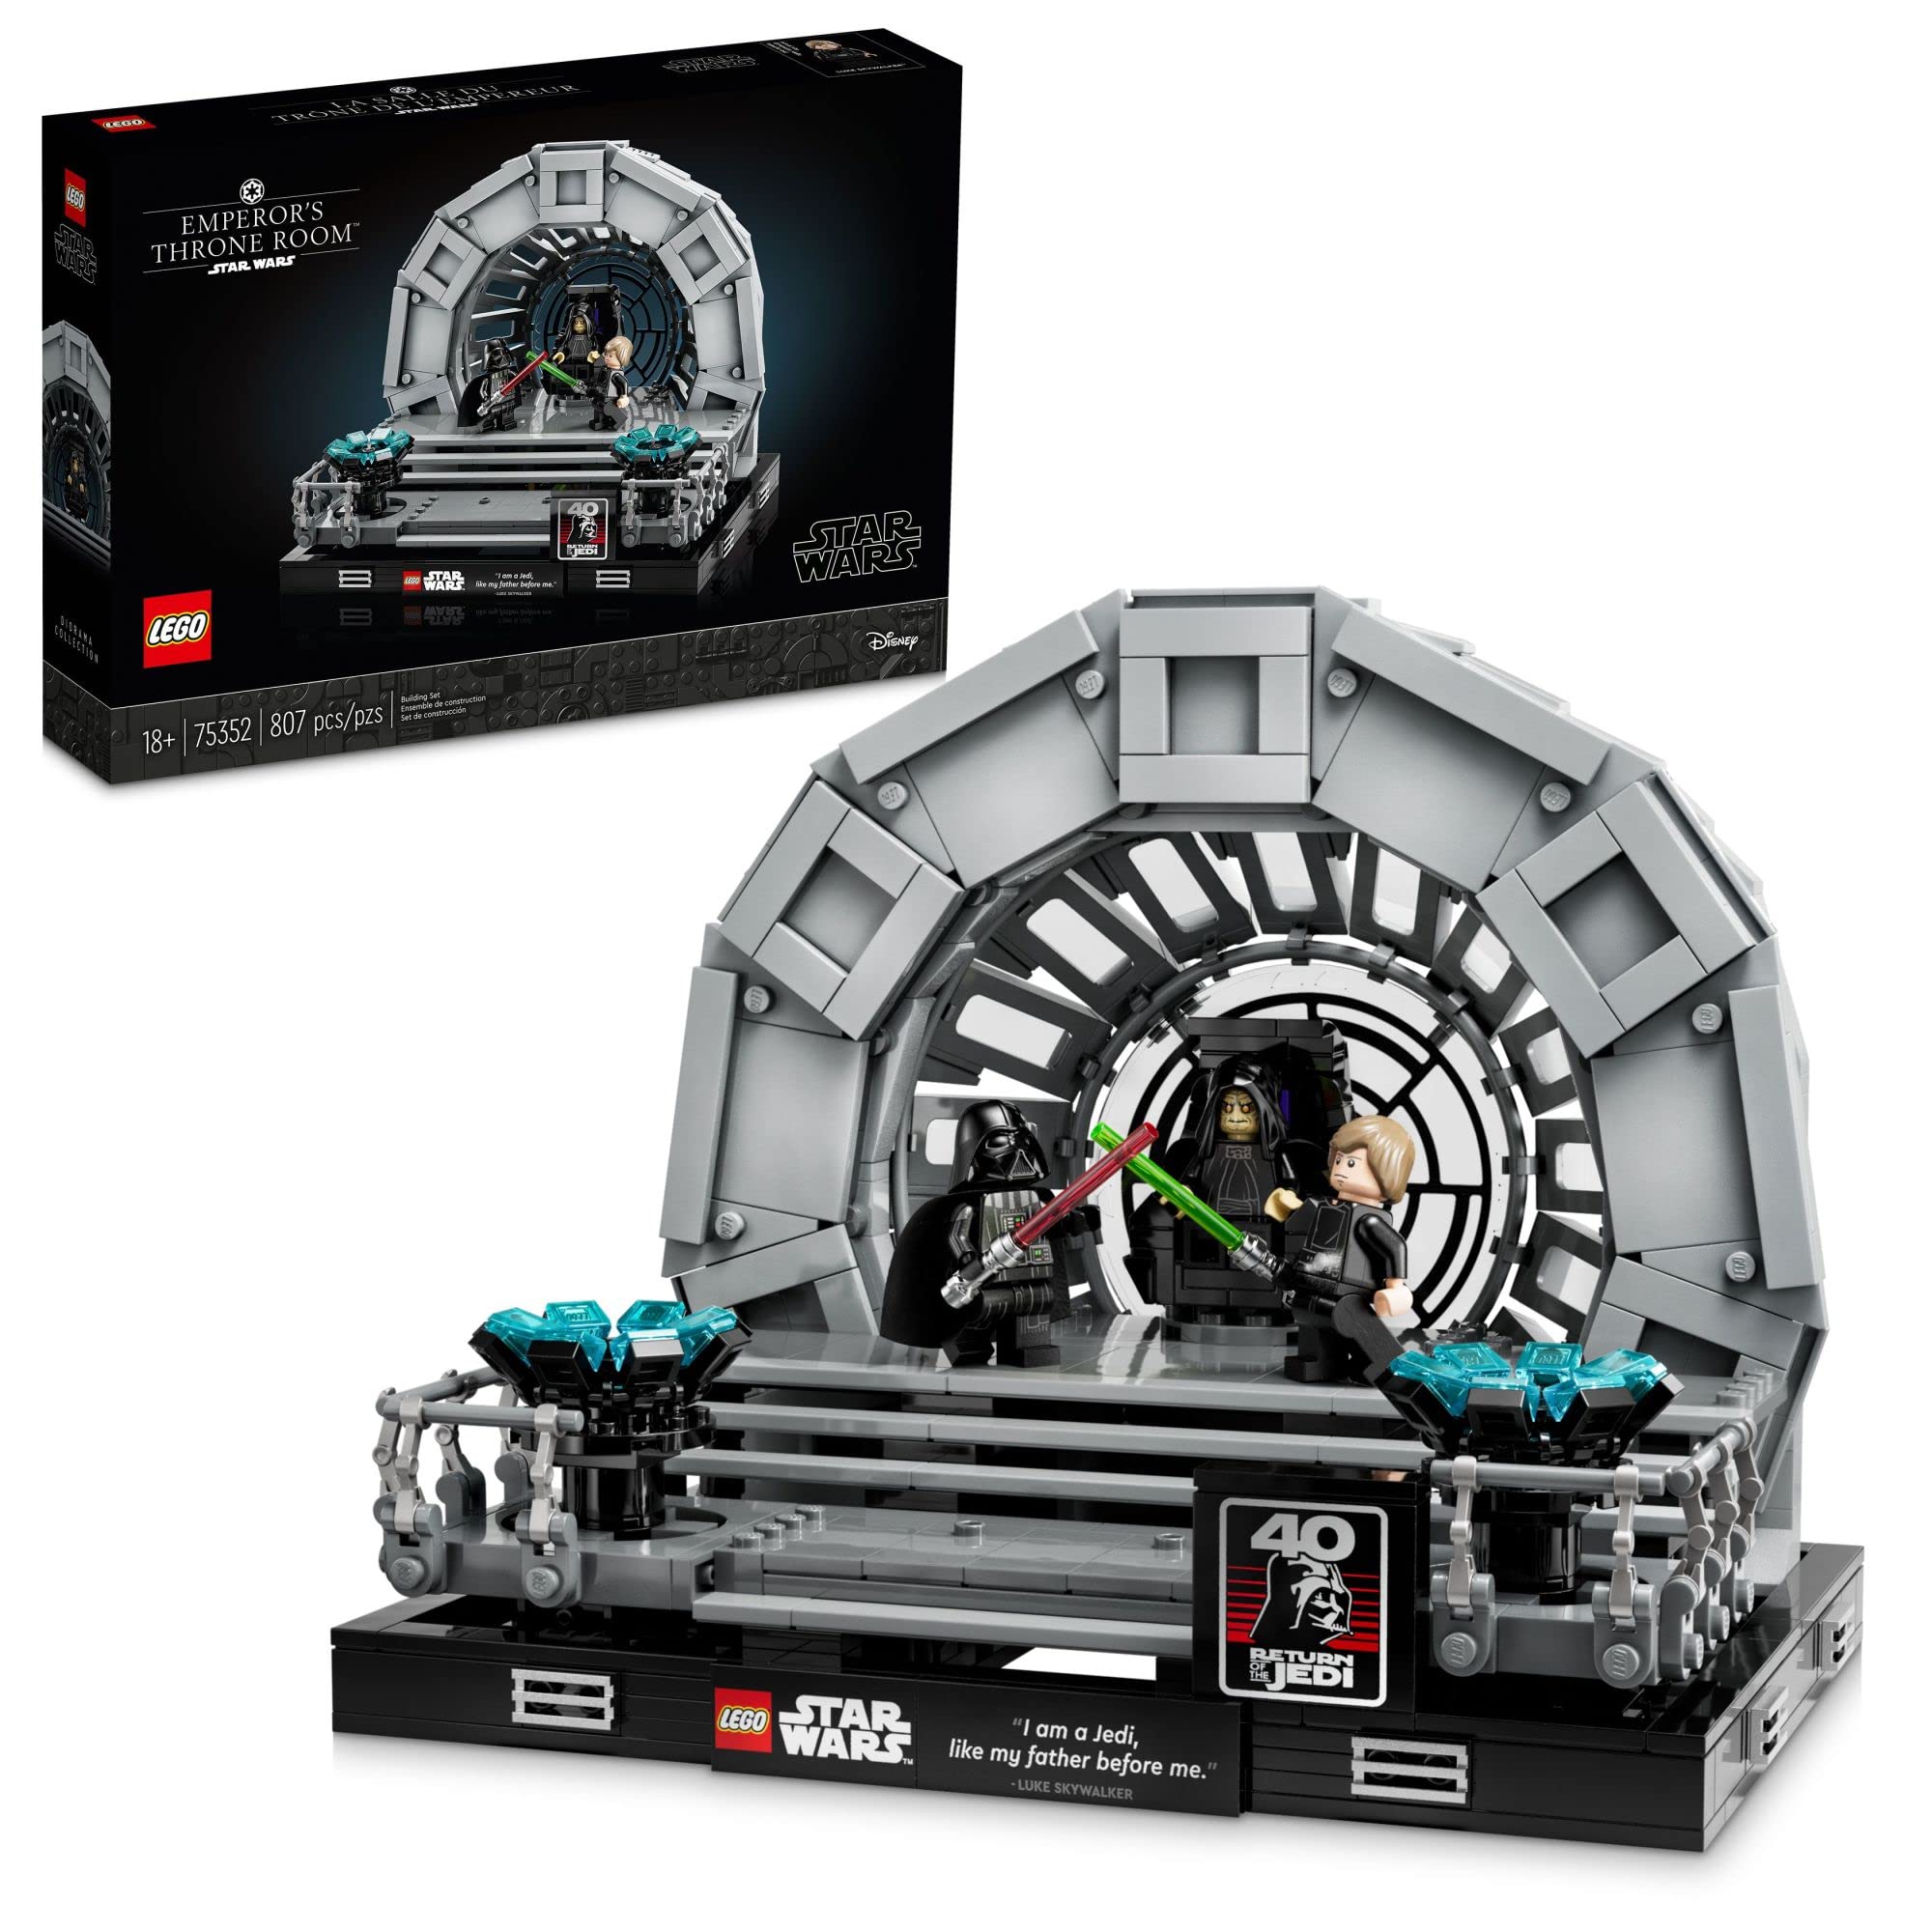 807-Piece LEGO Star Wars Emperor’s Throne Room Diorama + Star Wars Holiday Stocking $76 + Free Shipping